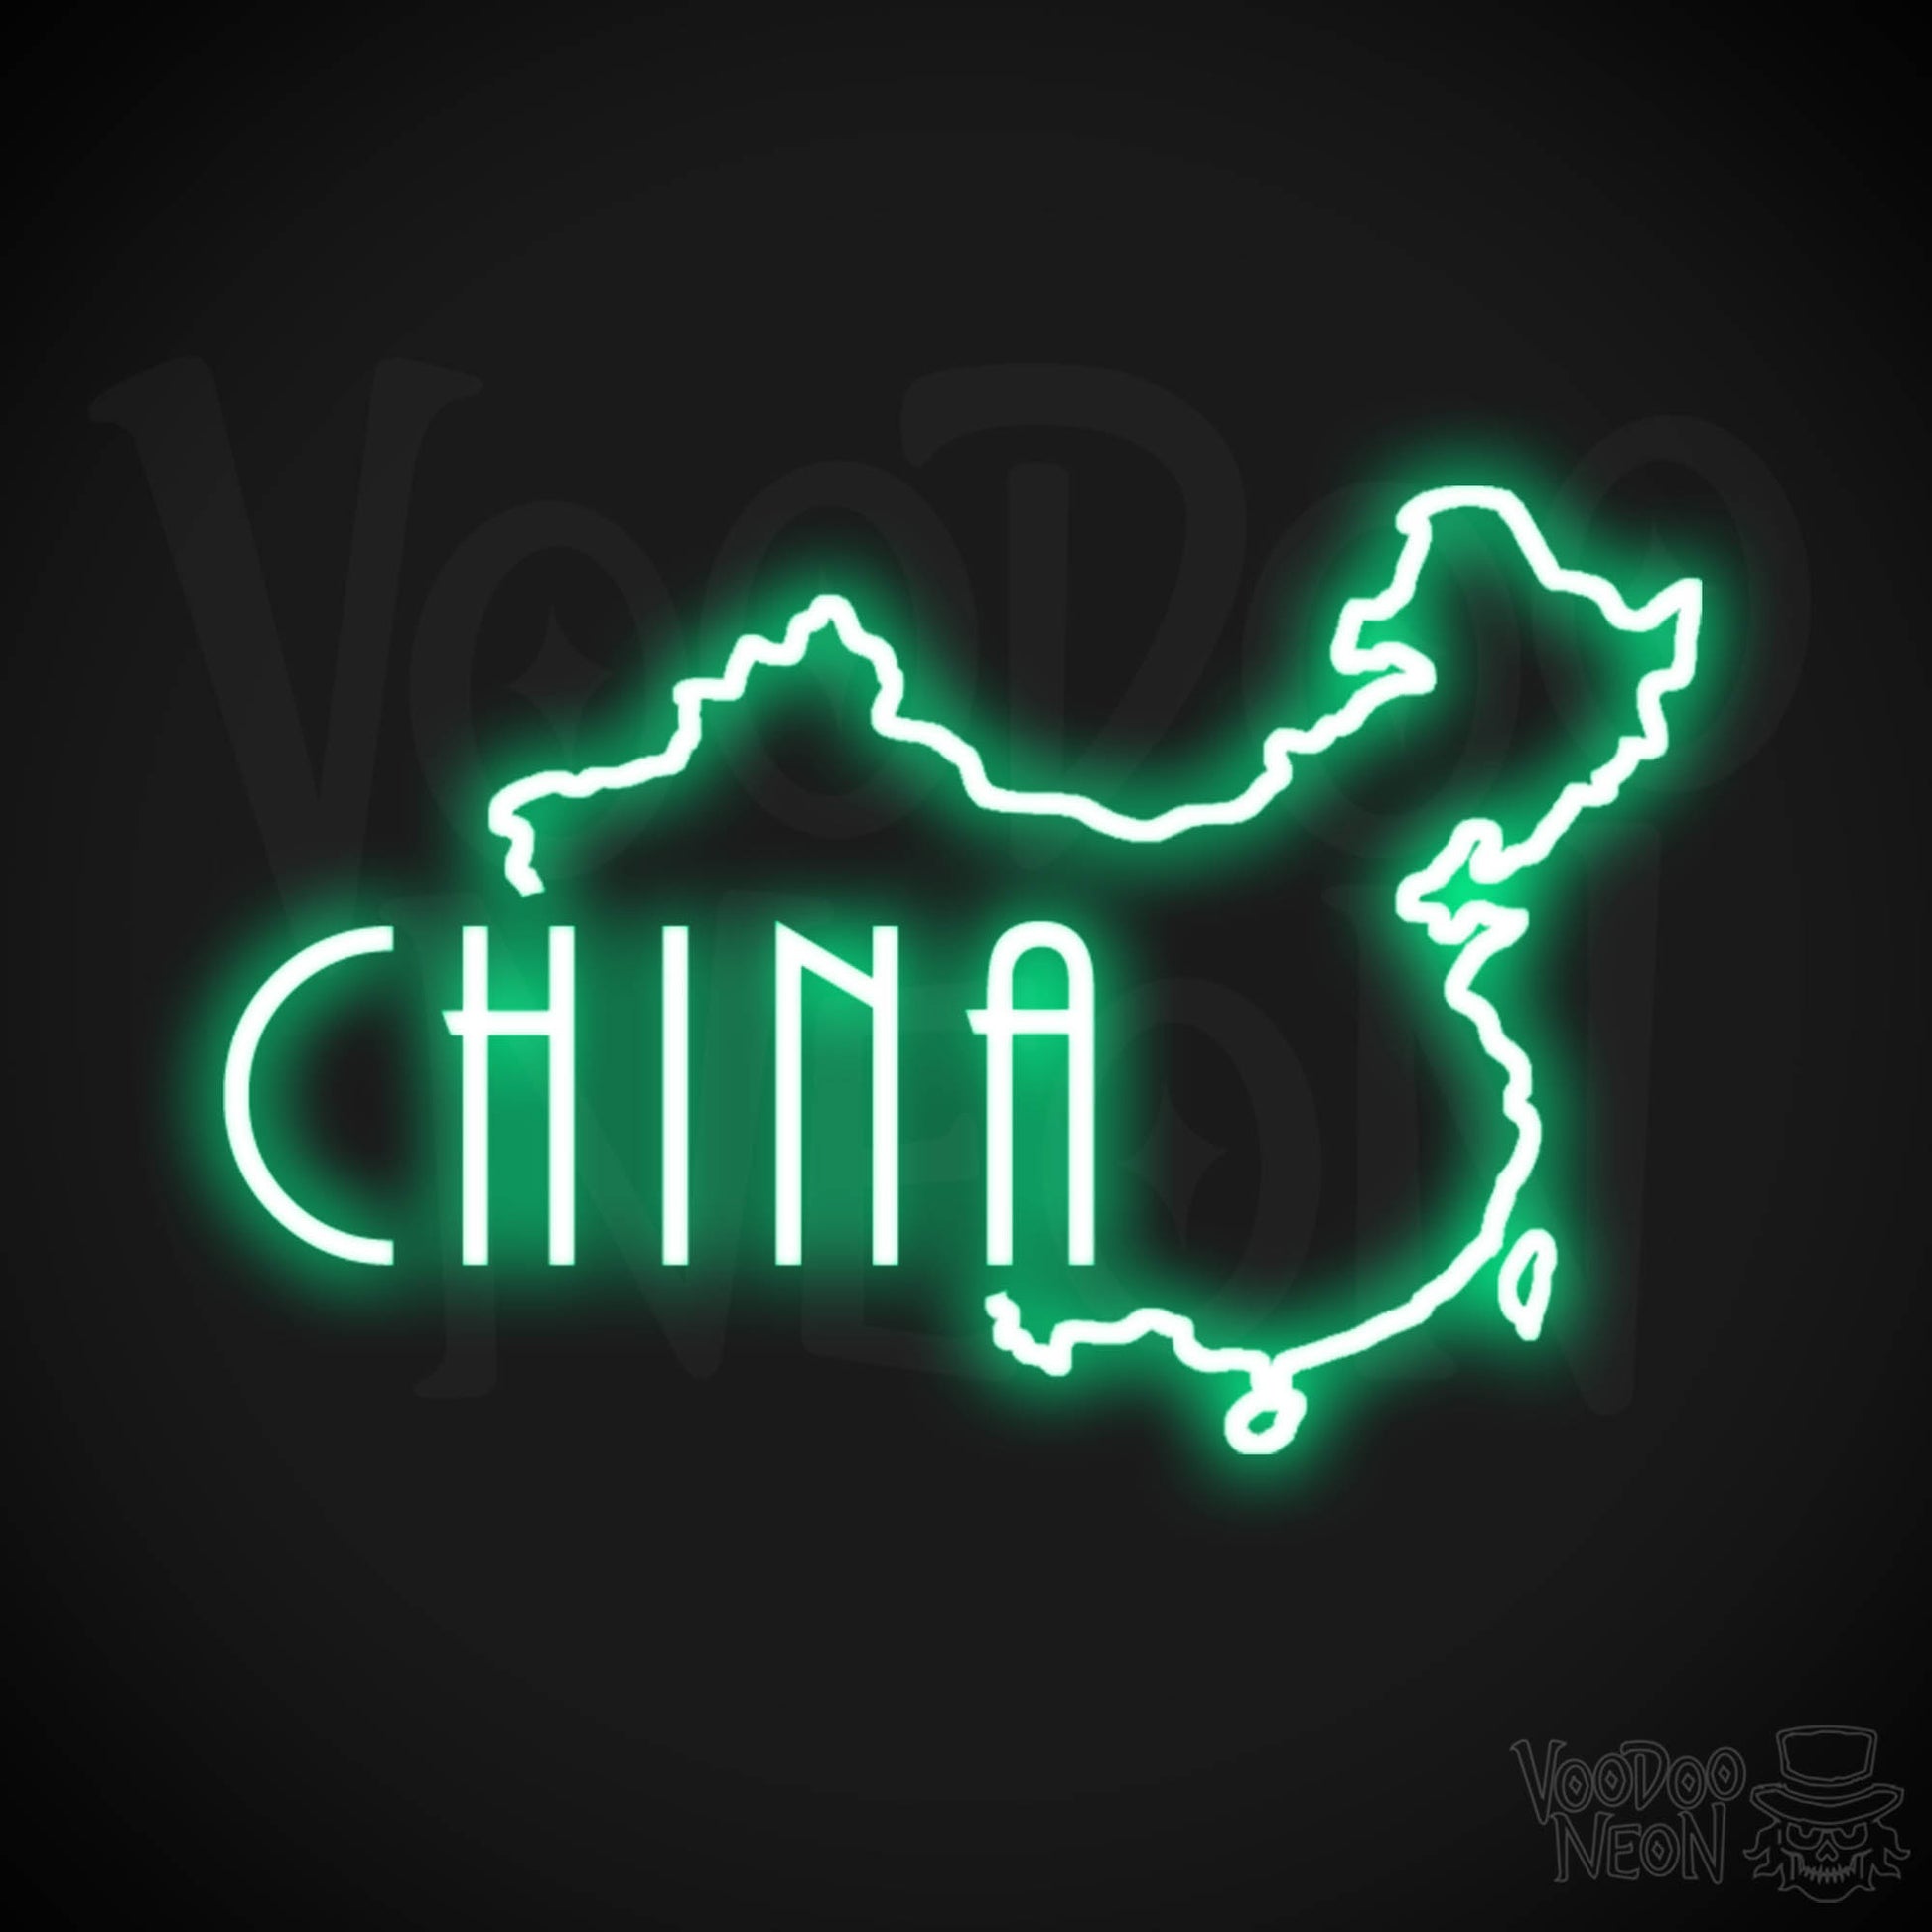 China Neon Sign - Neon China Sign - LED Sign - Color Green